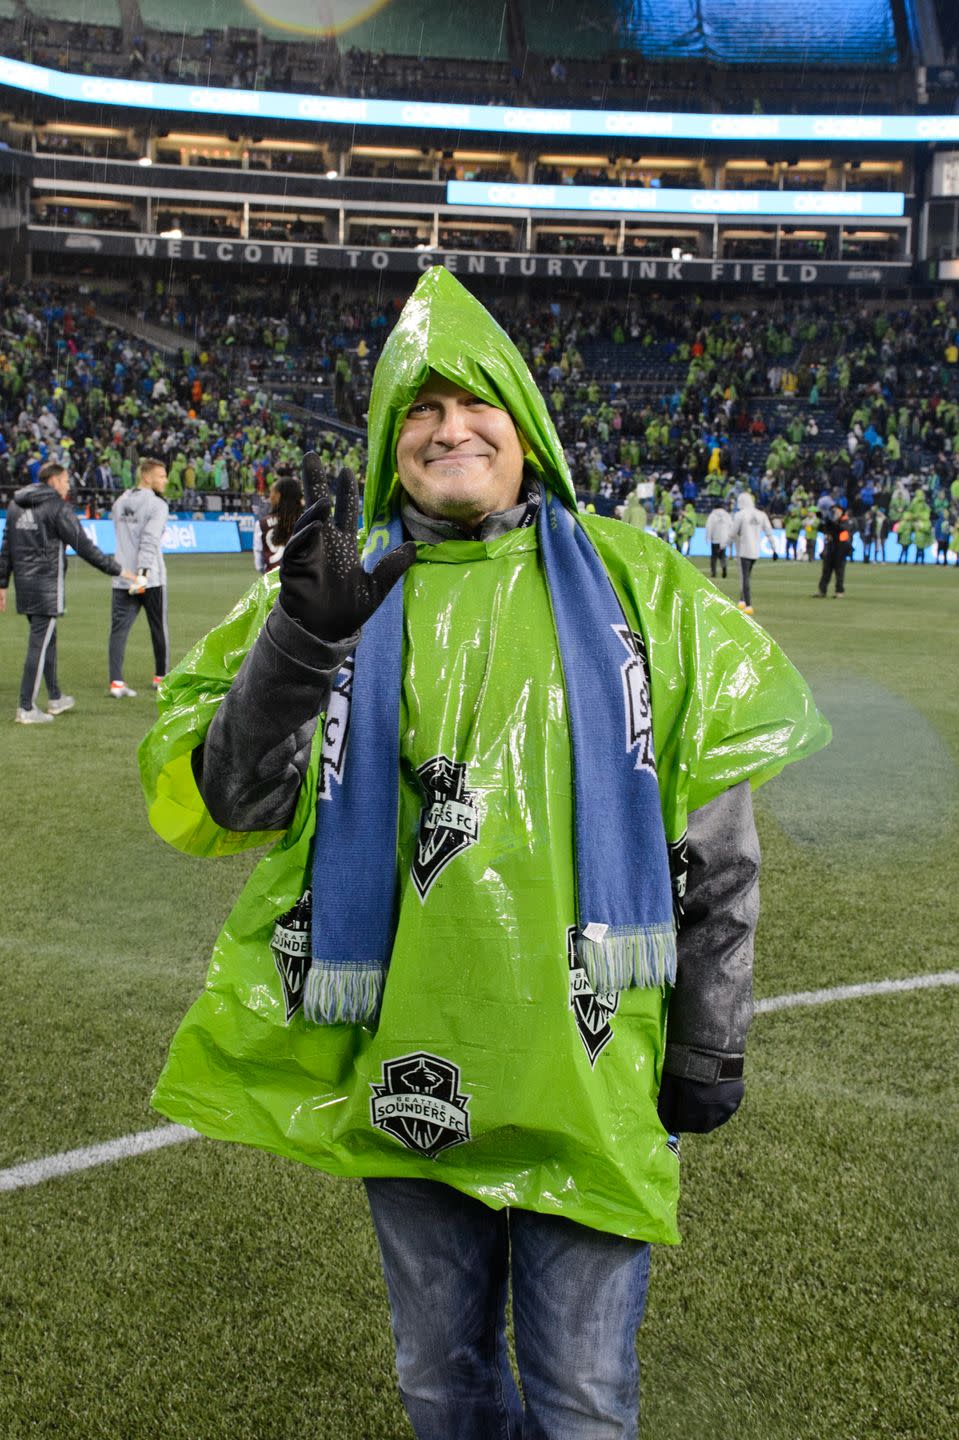 drew carey waving for a photo while wearing a scarf and rain poncho